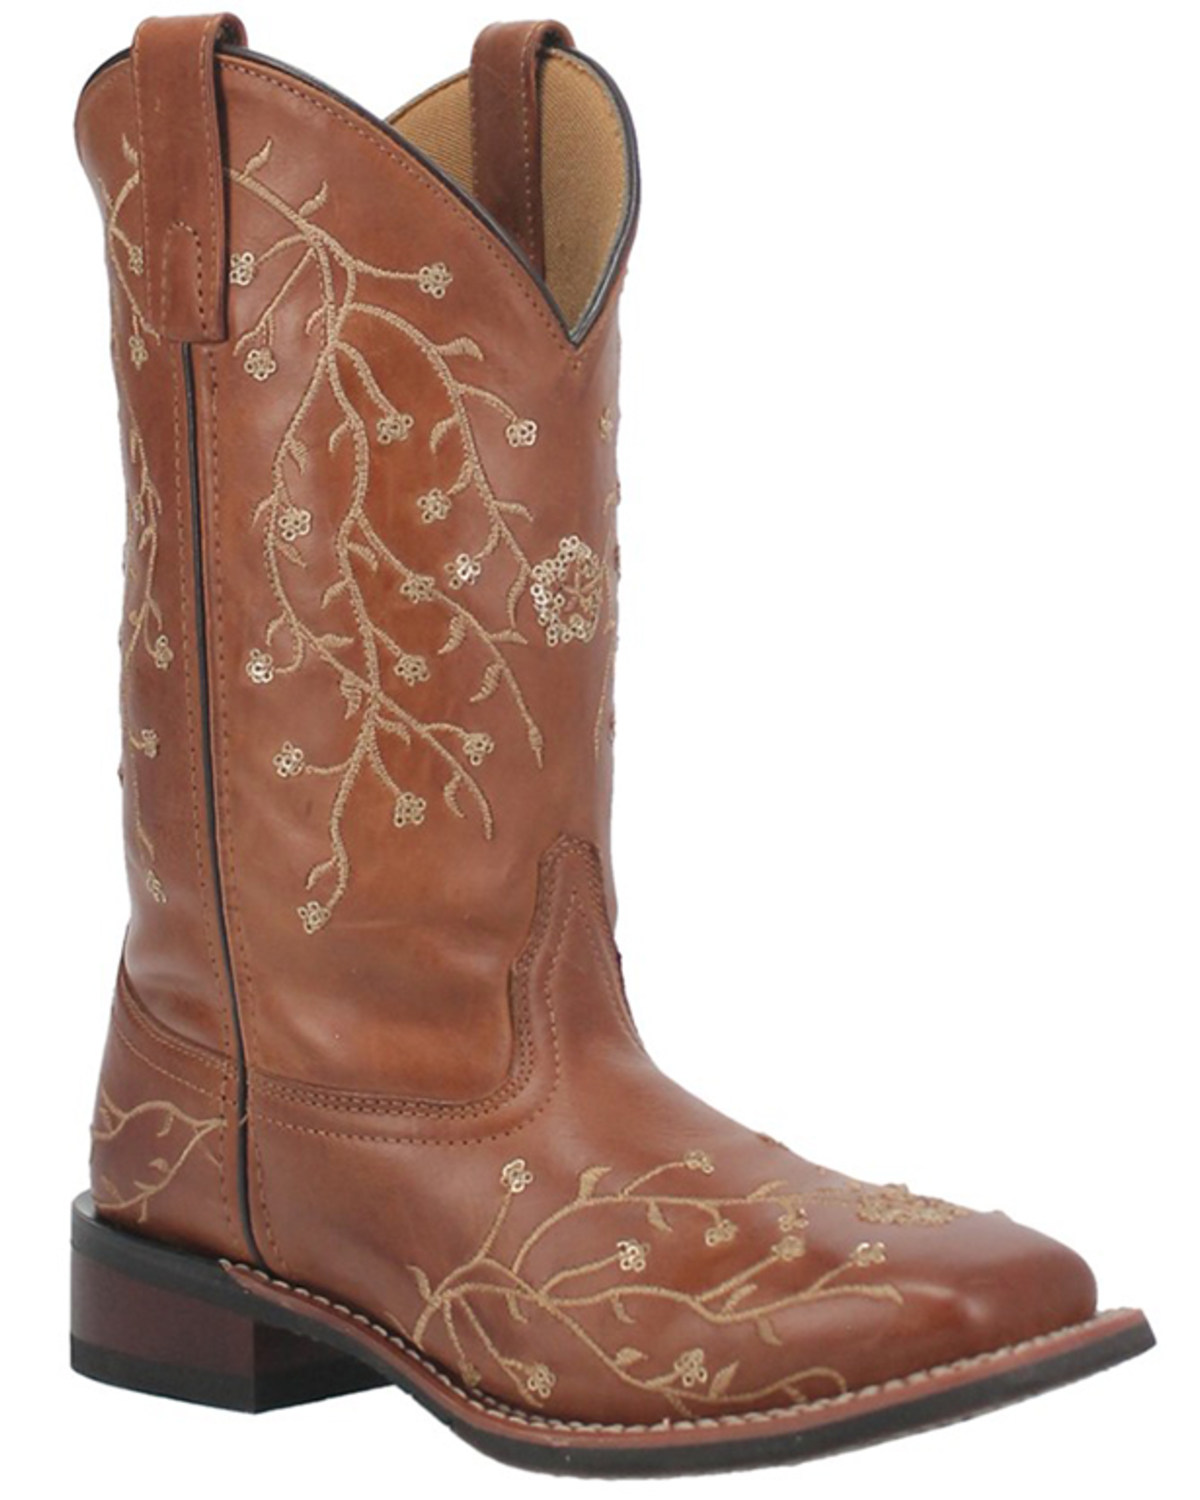 Laredo Women's Sequin Embellished Western Boots - Broad Square Toe